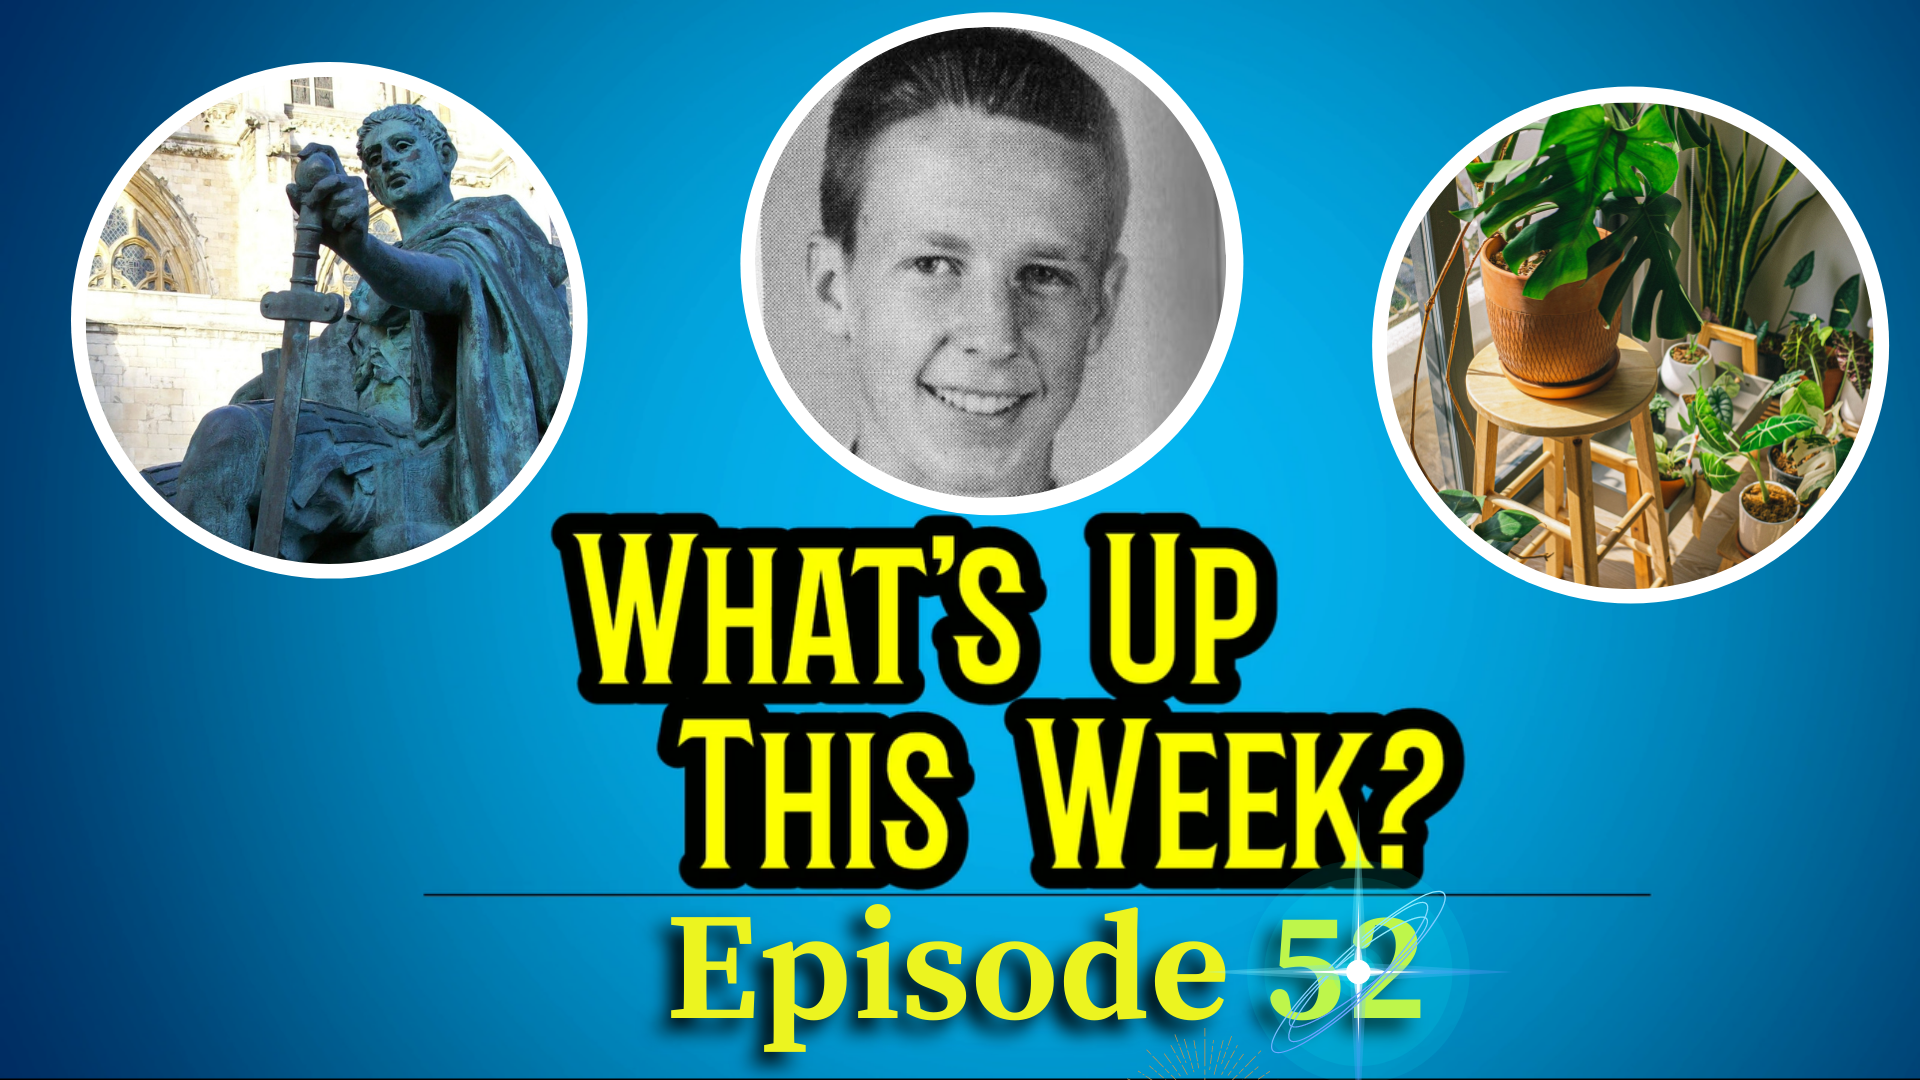 Text: What's Up This Week? Episode 52. 3 images in circles: a statue of Constantine, Jim Davis, and a group of houseplants. 